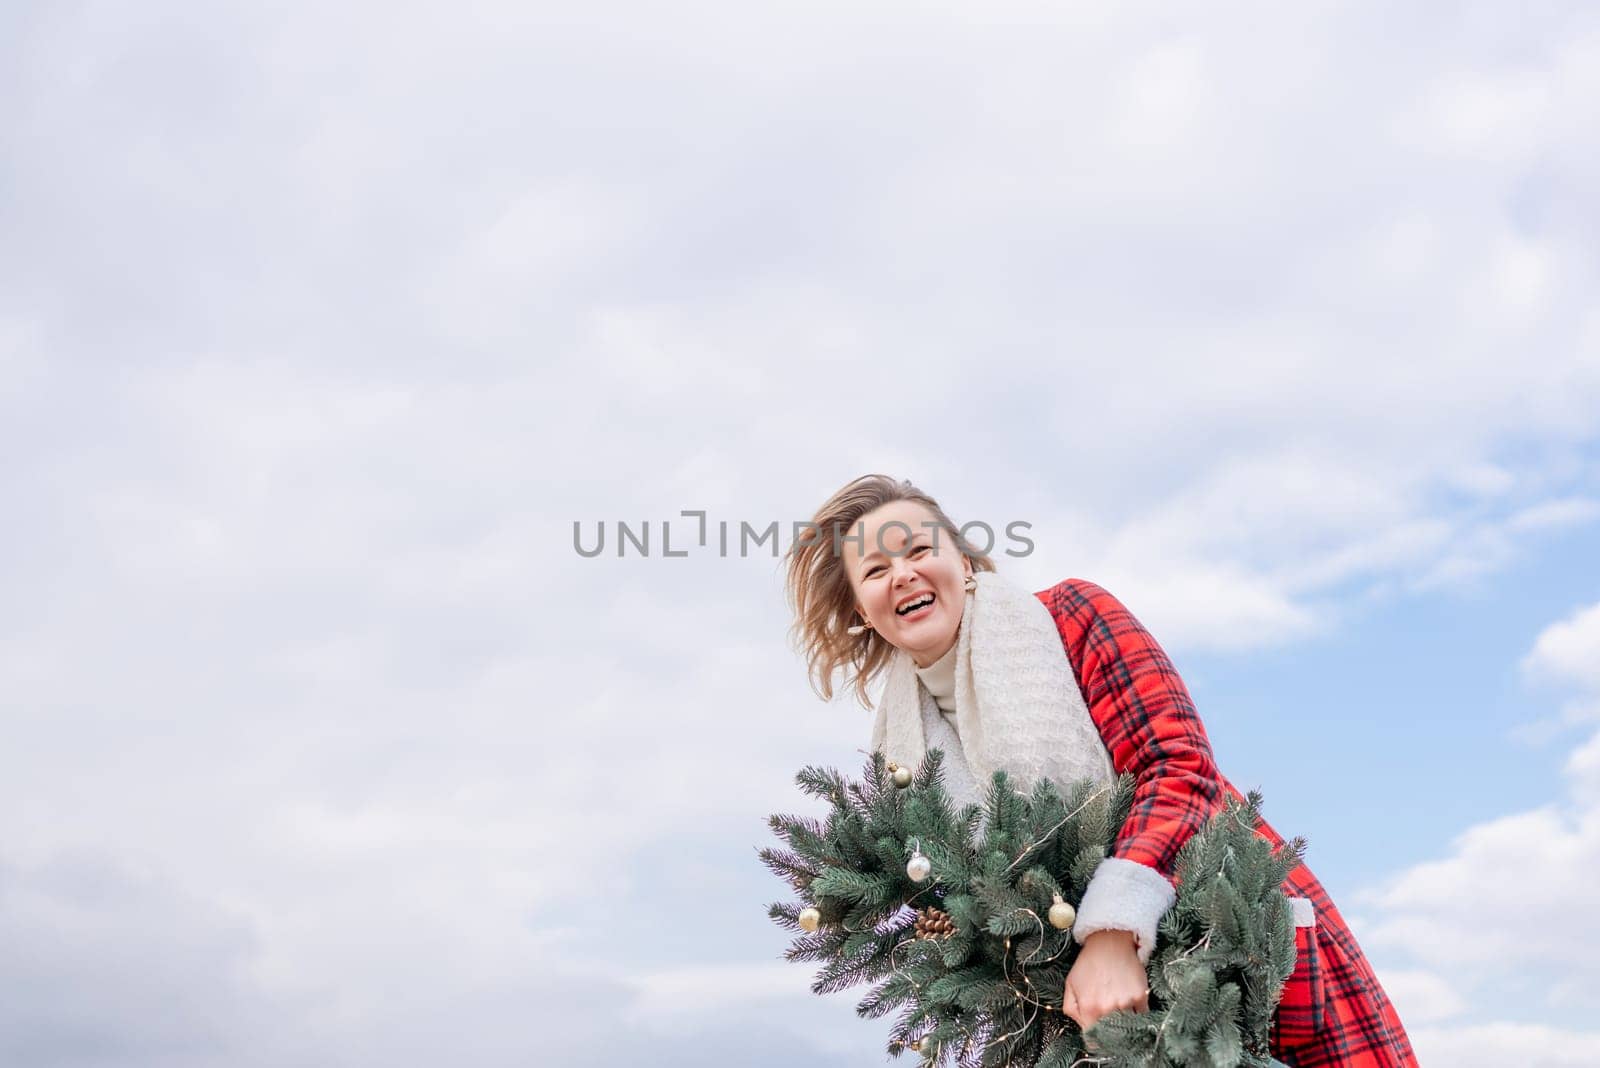 Blond woman holding Christmas tree by the sea. Christmas portrait of a happy woman walking along the beach and holding a Christmas tree in her hands. Dressed in a red coat, white suit